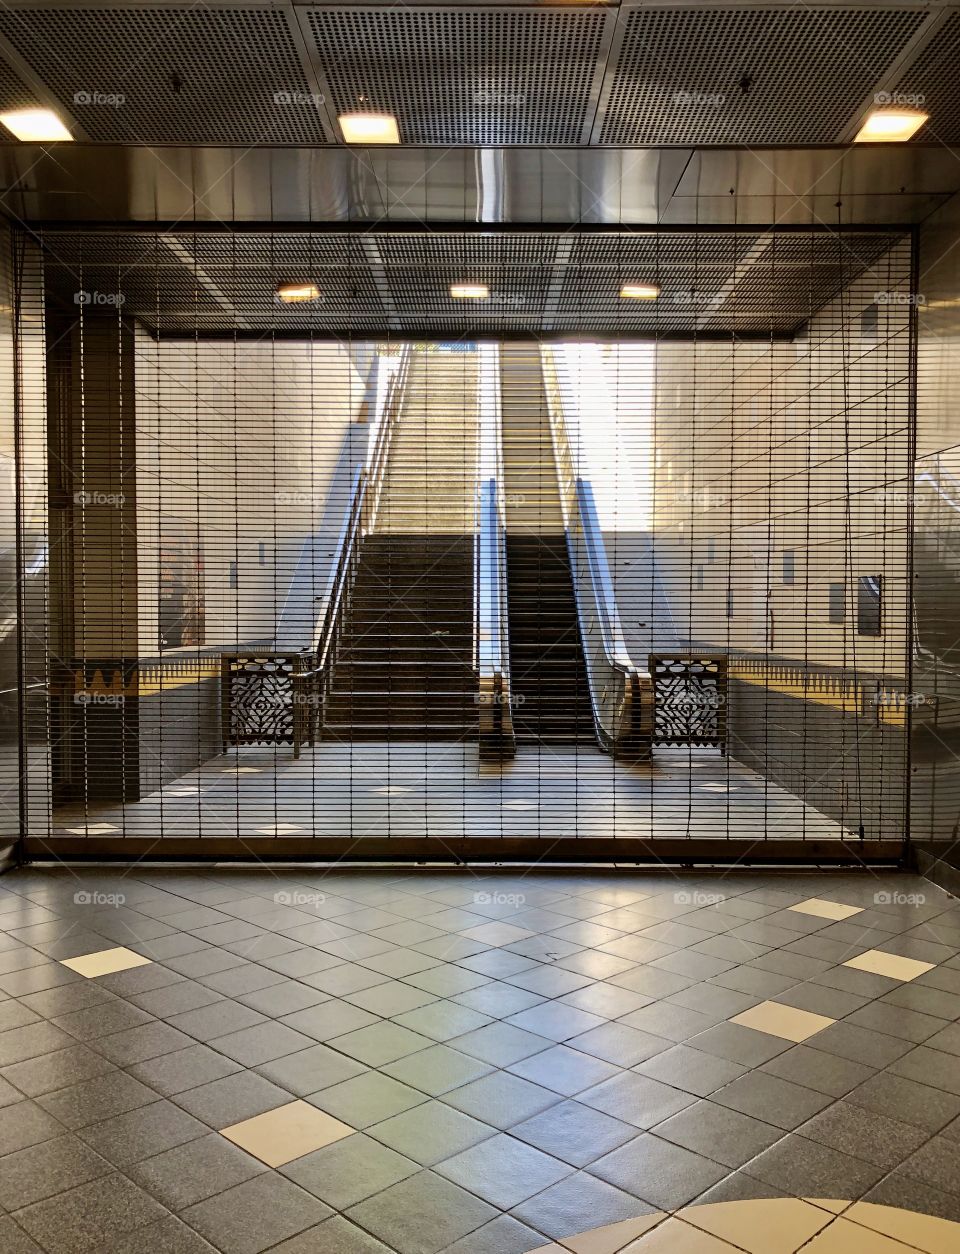 A gate is pulled down, closing a Metro Station exit (reduced service schedules due to Pandemic) in Los Angeles CA 6.12.2020